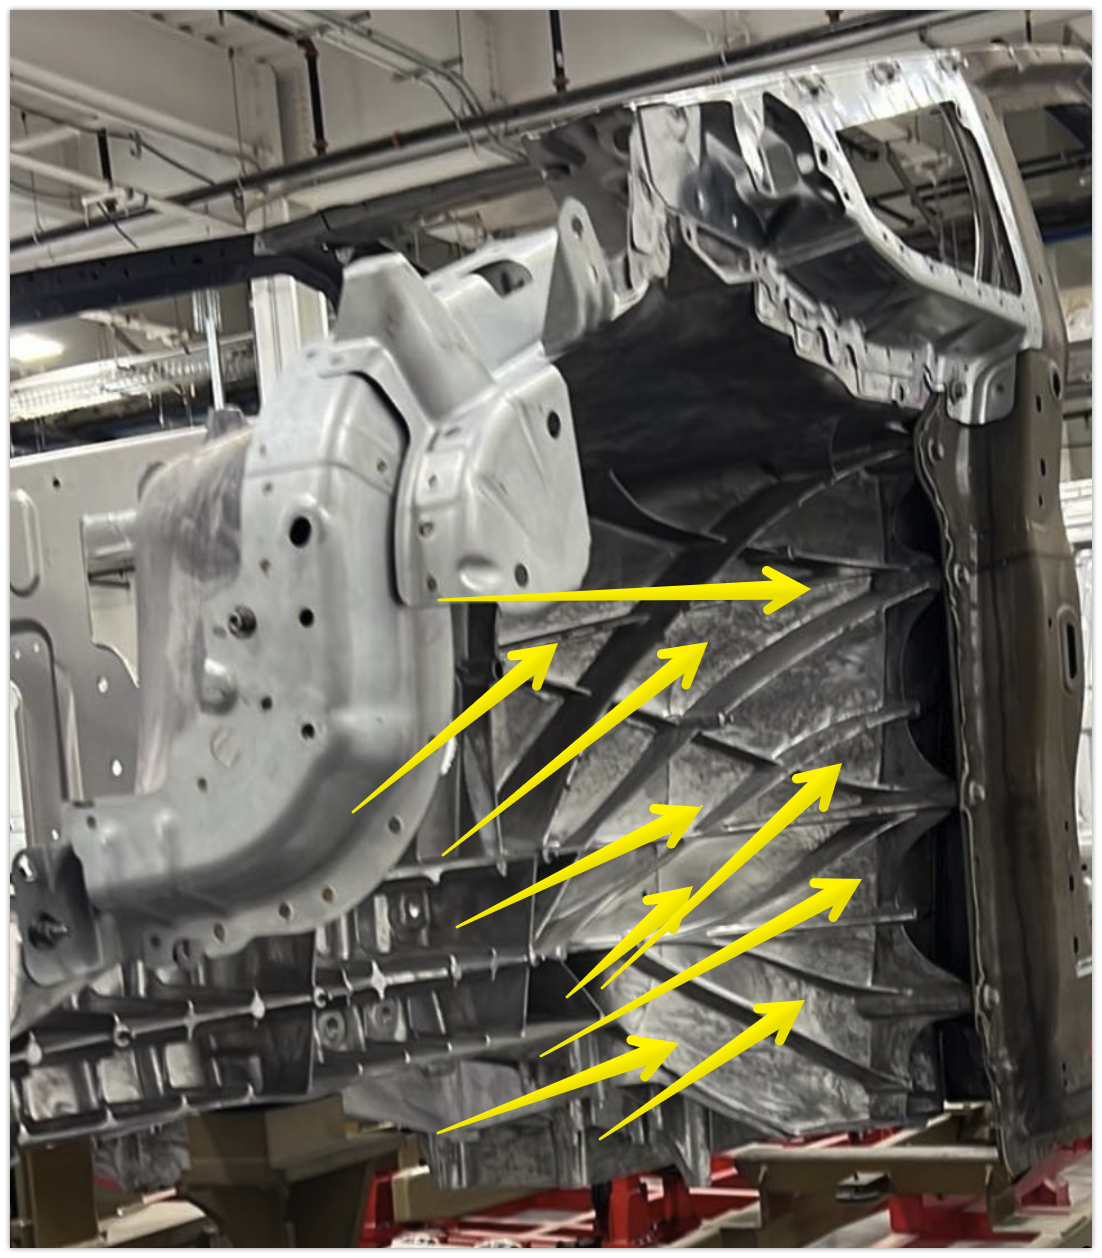 Tesla Cybertruck New Body-in-White pic shows front wheel well, front quarter window + more debris tra